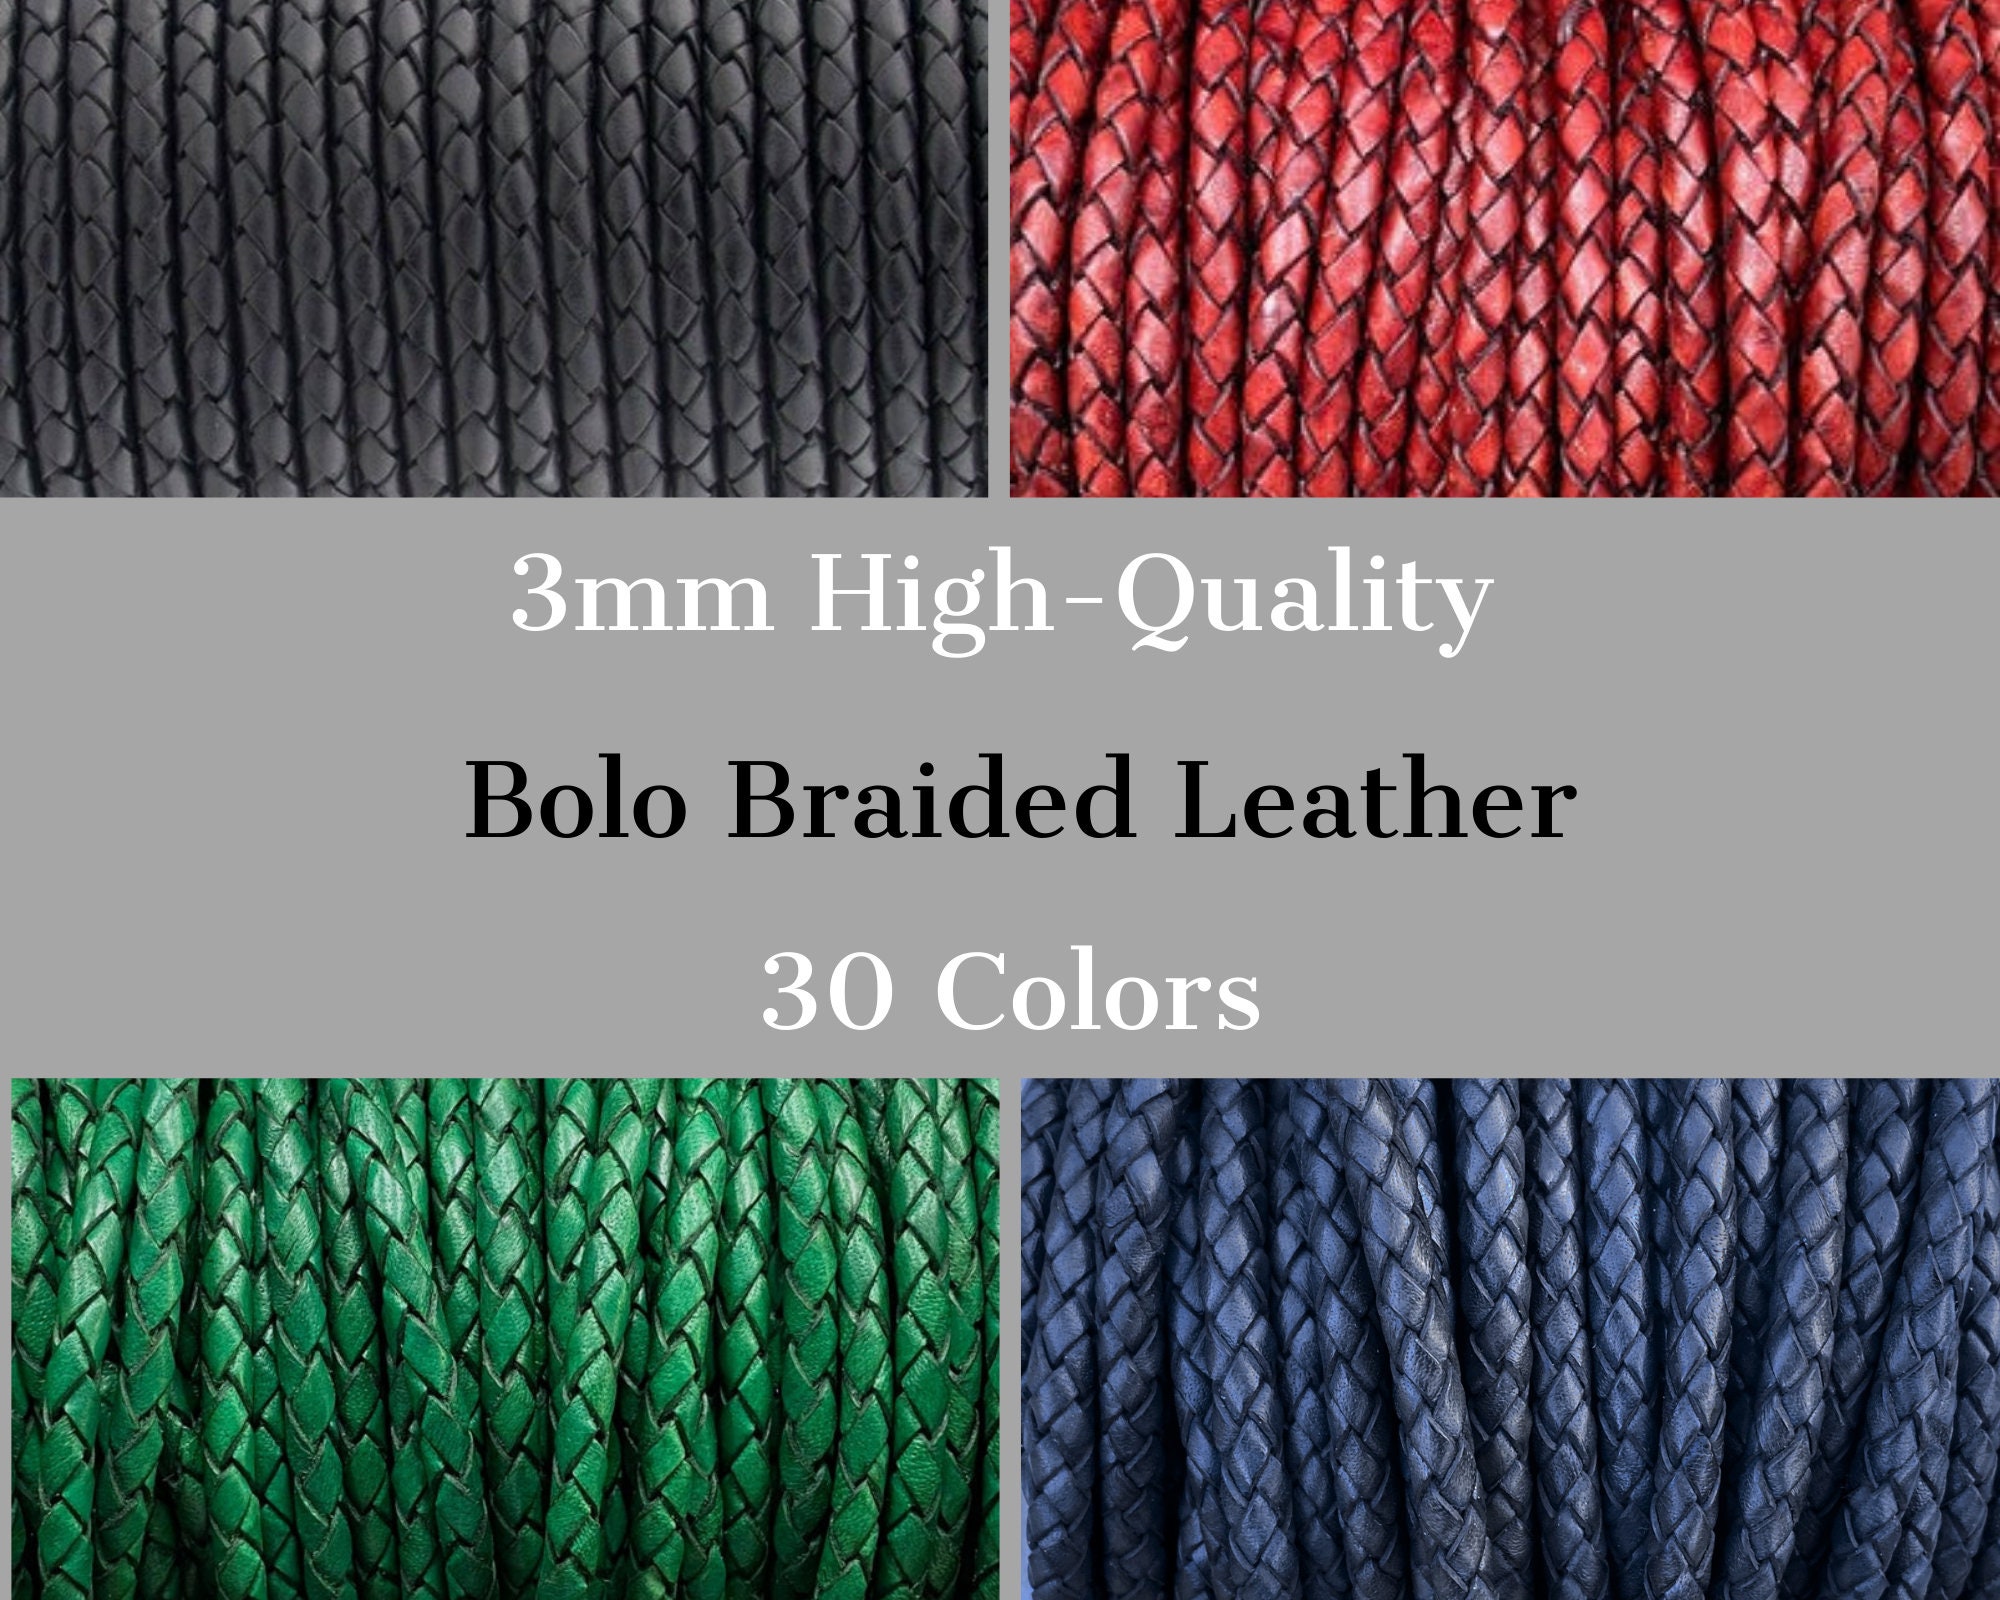 Premium Genuine Round Bolo Braided Leather Cord Rope String Lace 5MM 3/16